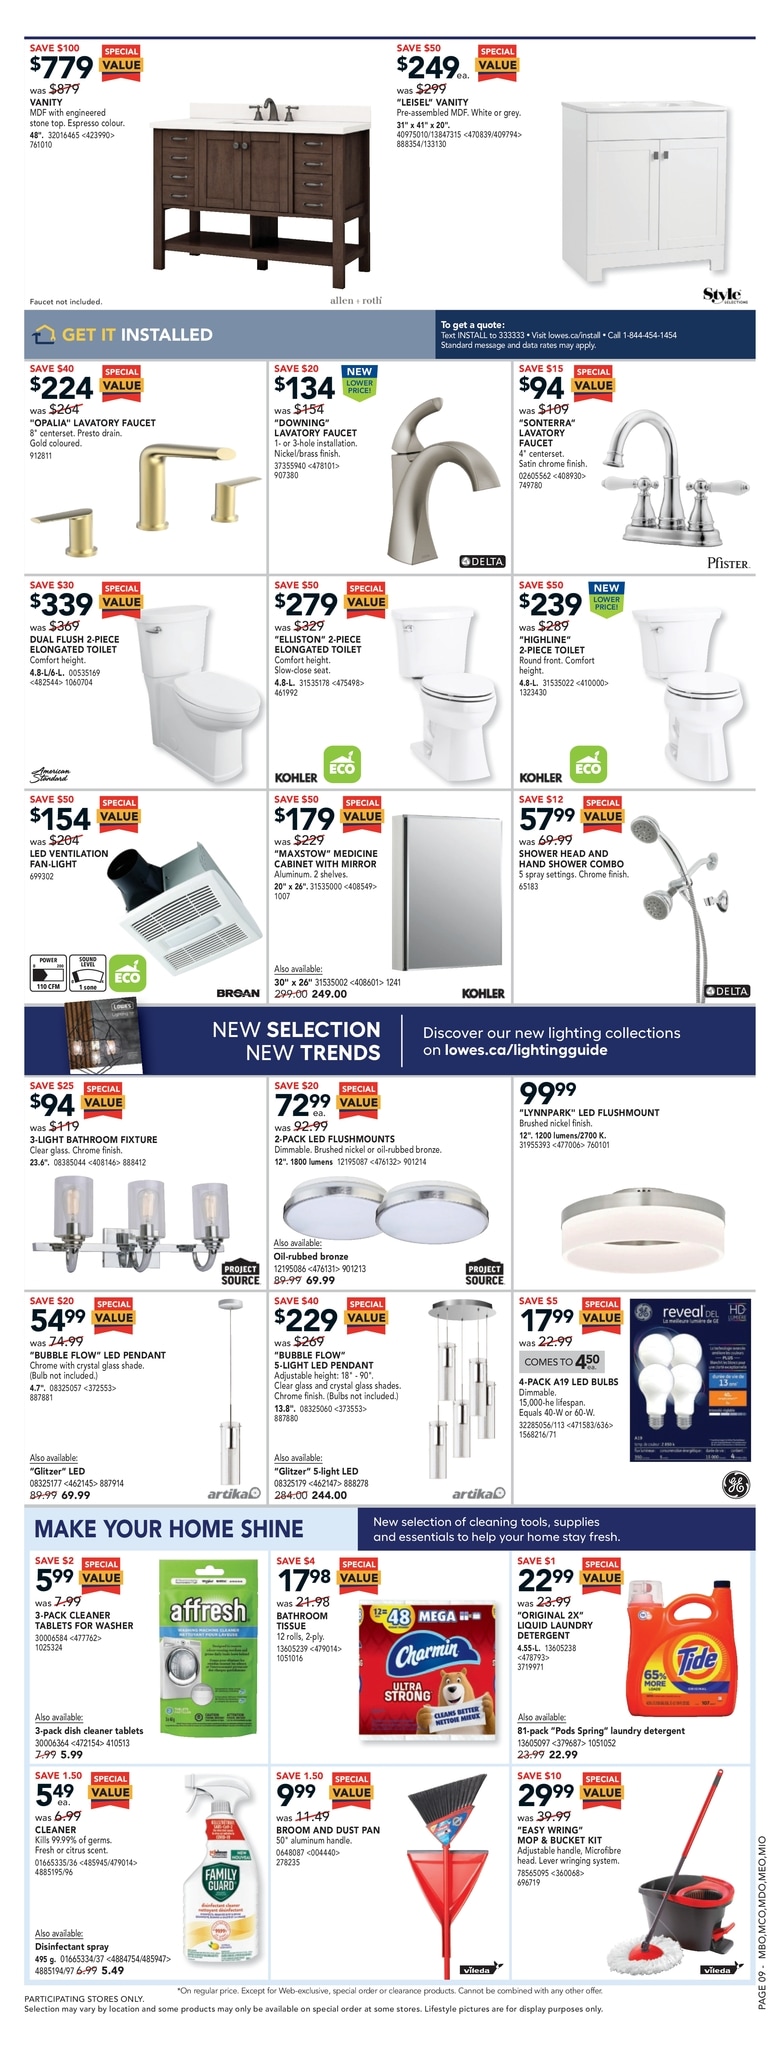 LOWE'S - Weekly Flyer Specials - Page 15